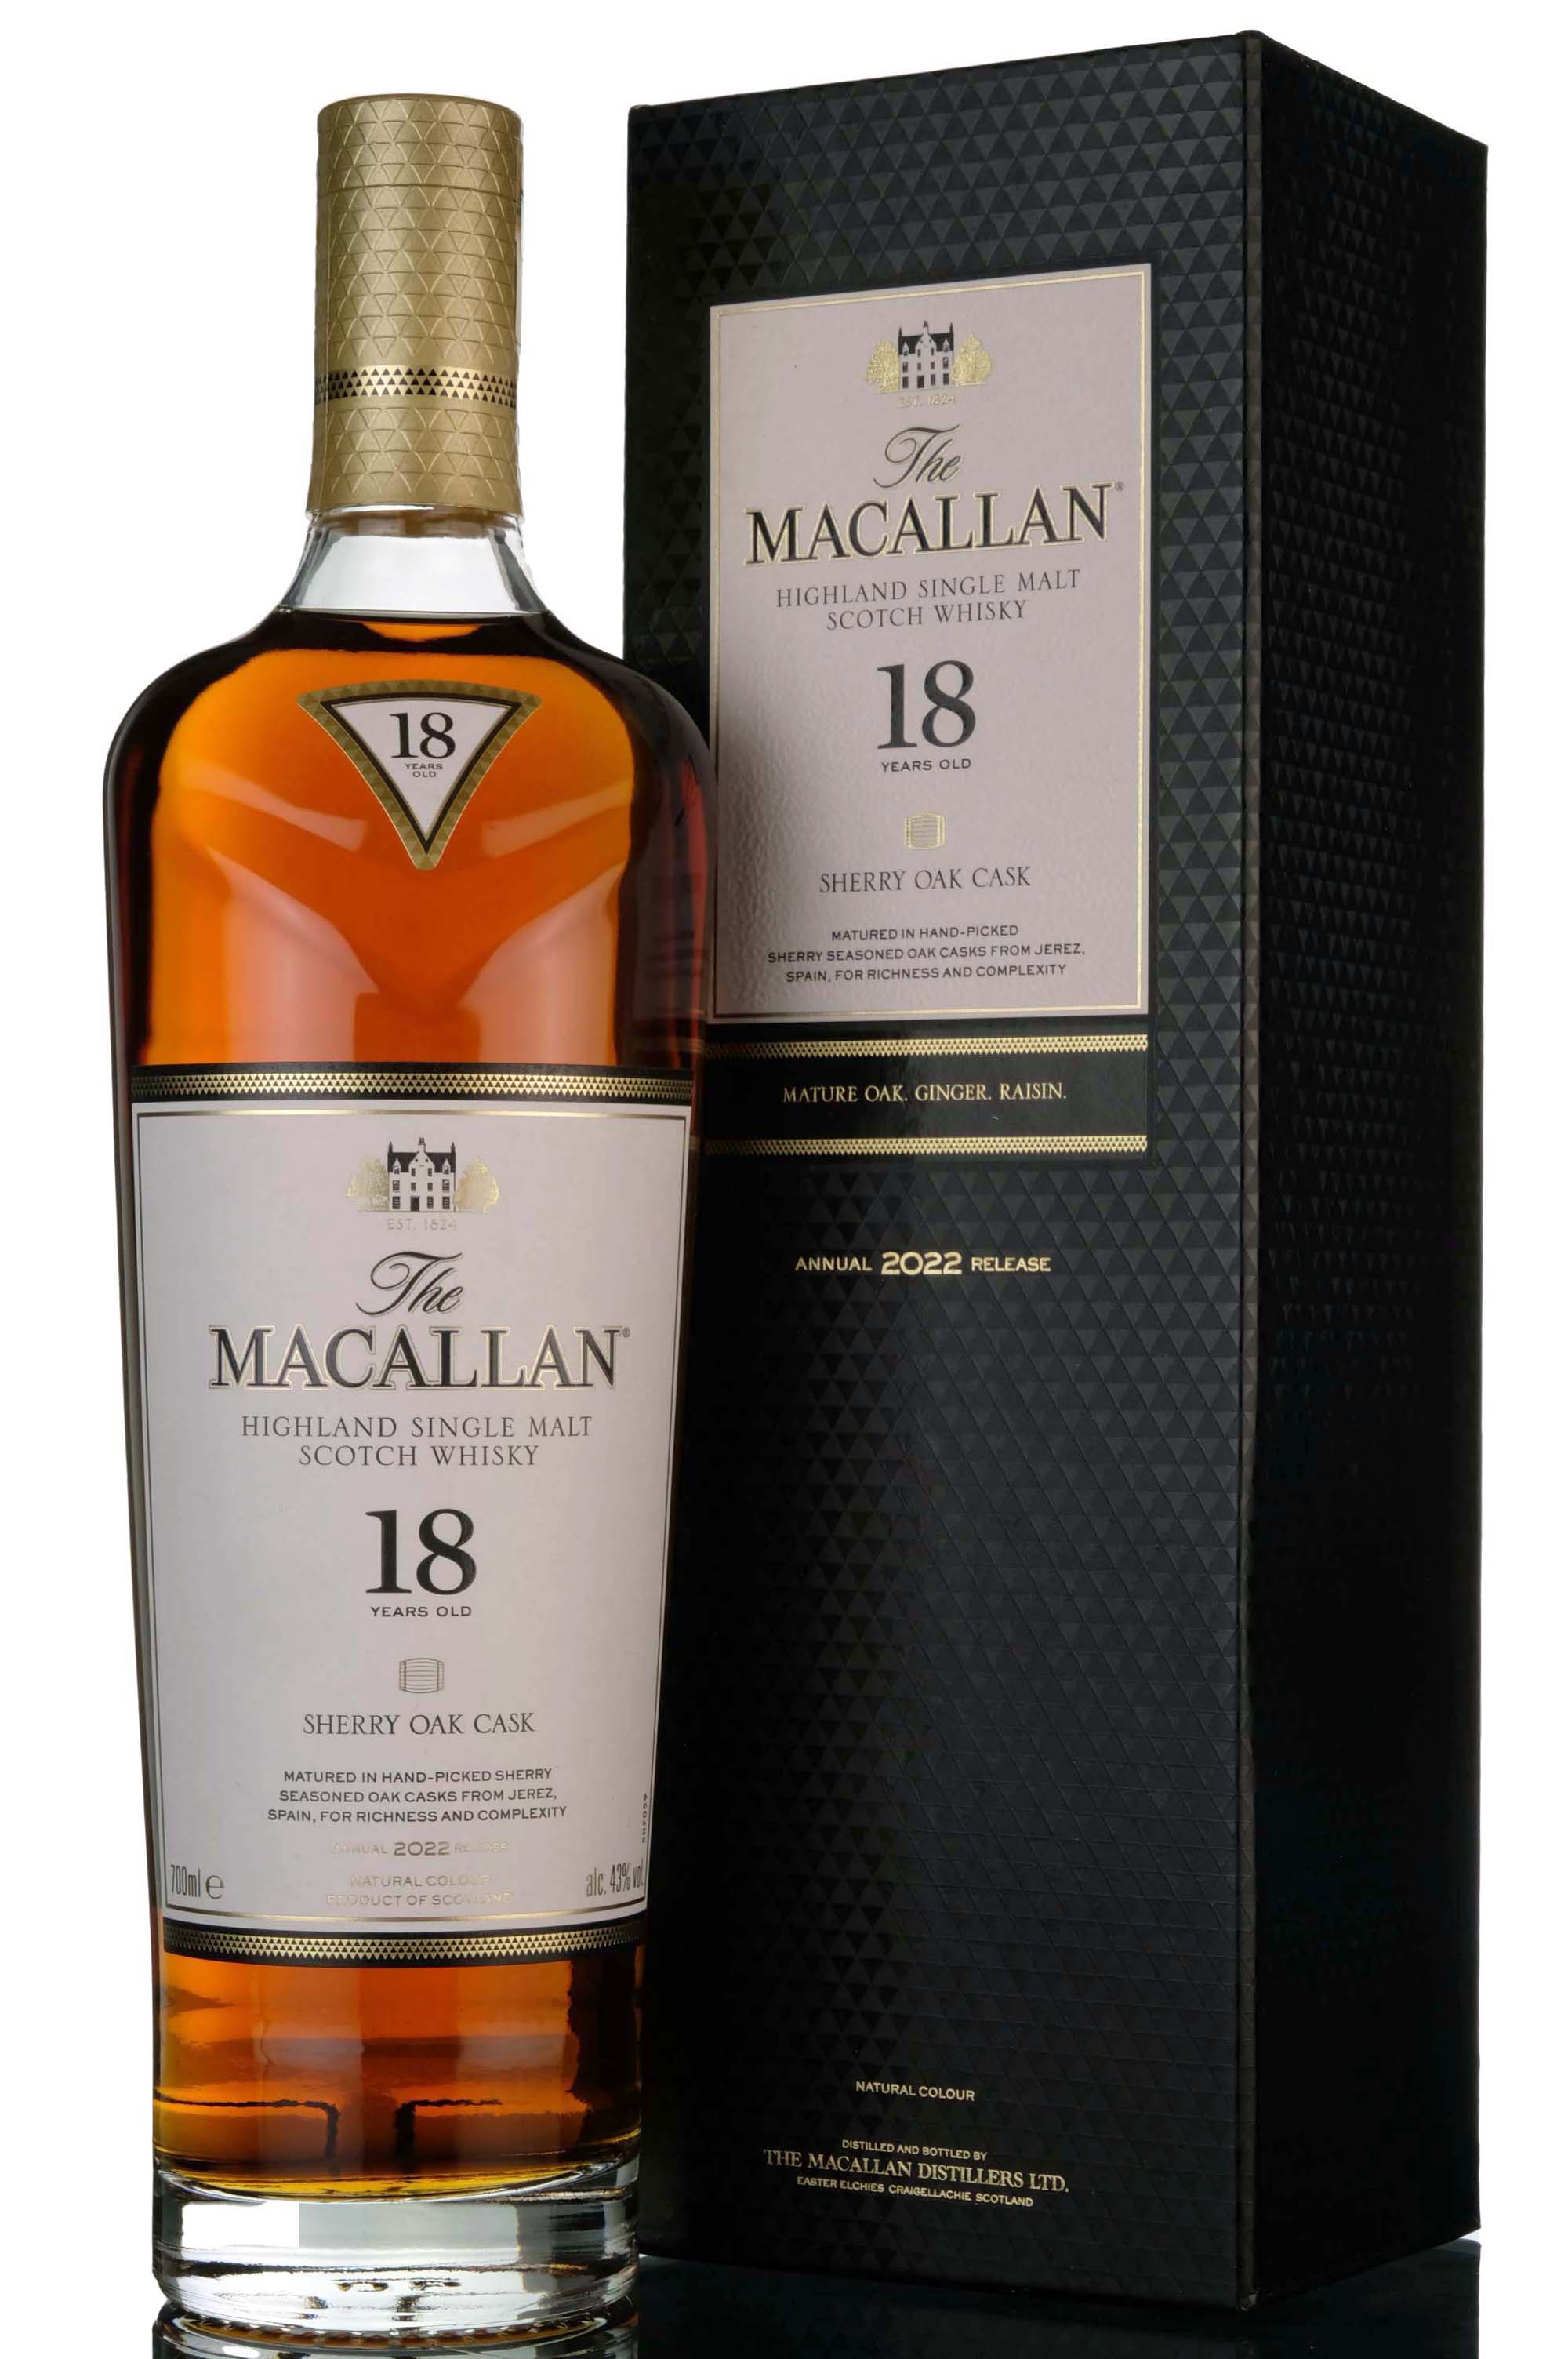 Macallan 18 Year Old - Sherry Cask - 2022 Release